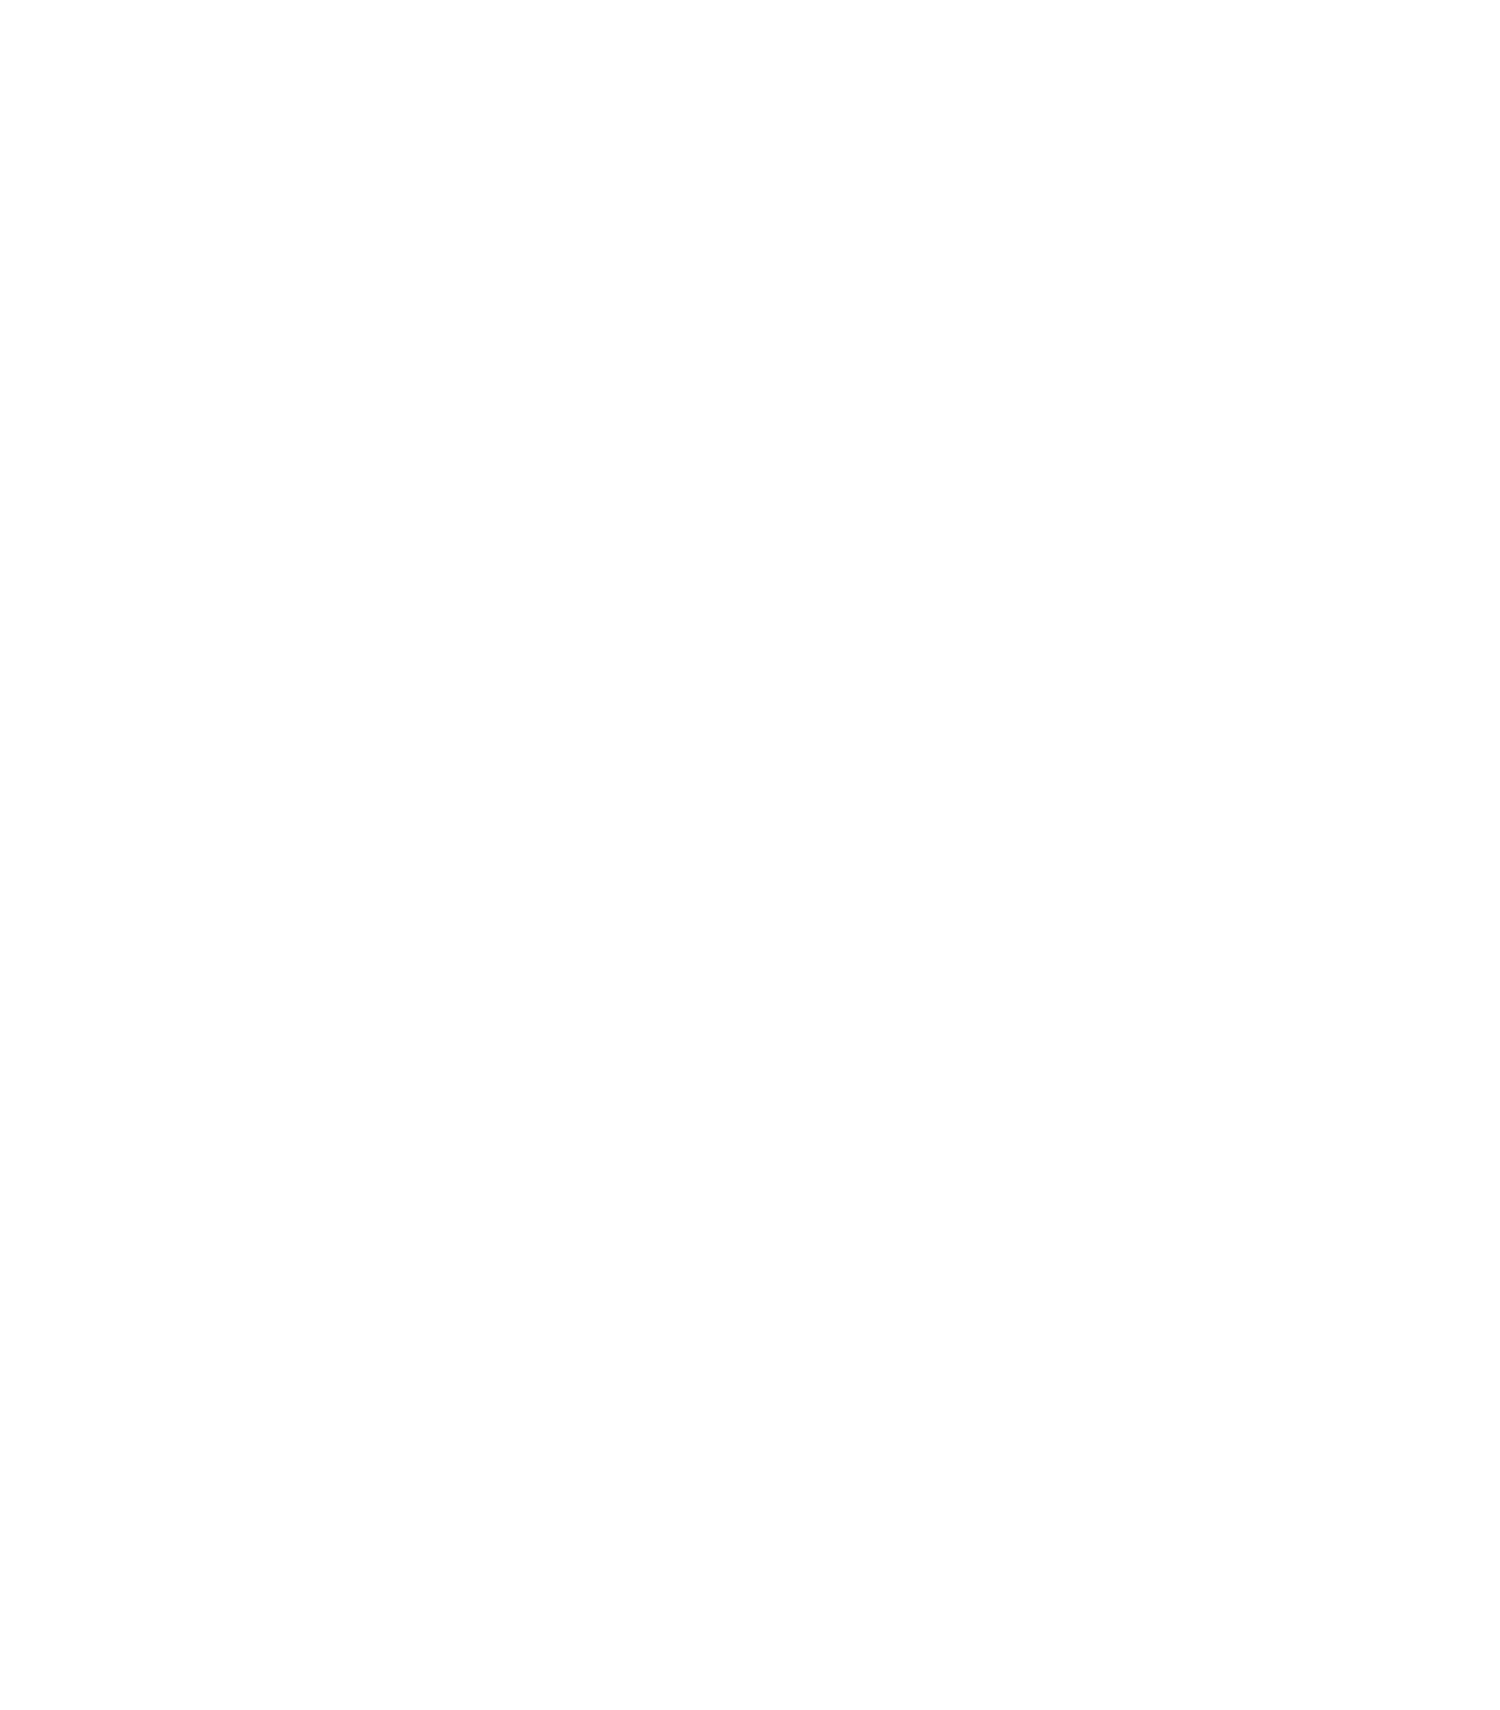 S2F Accounting